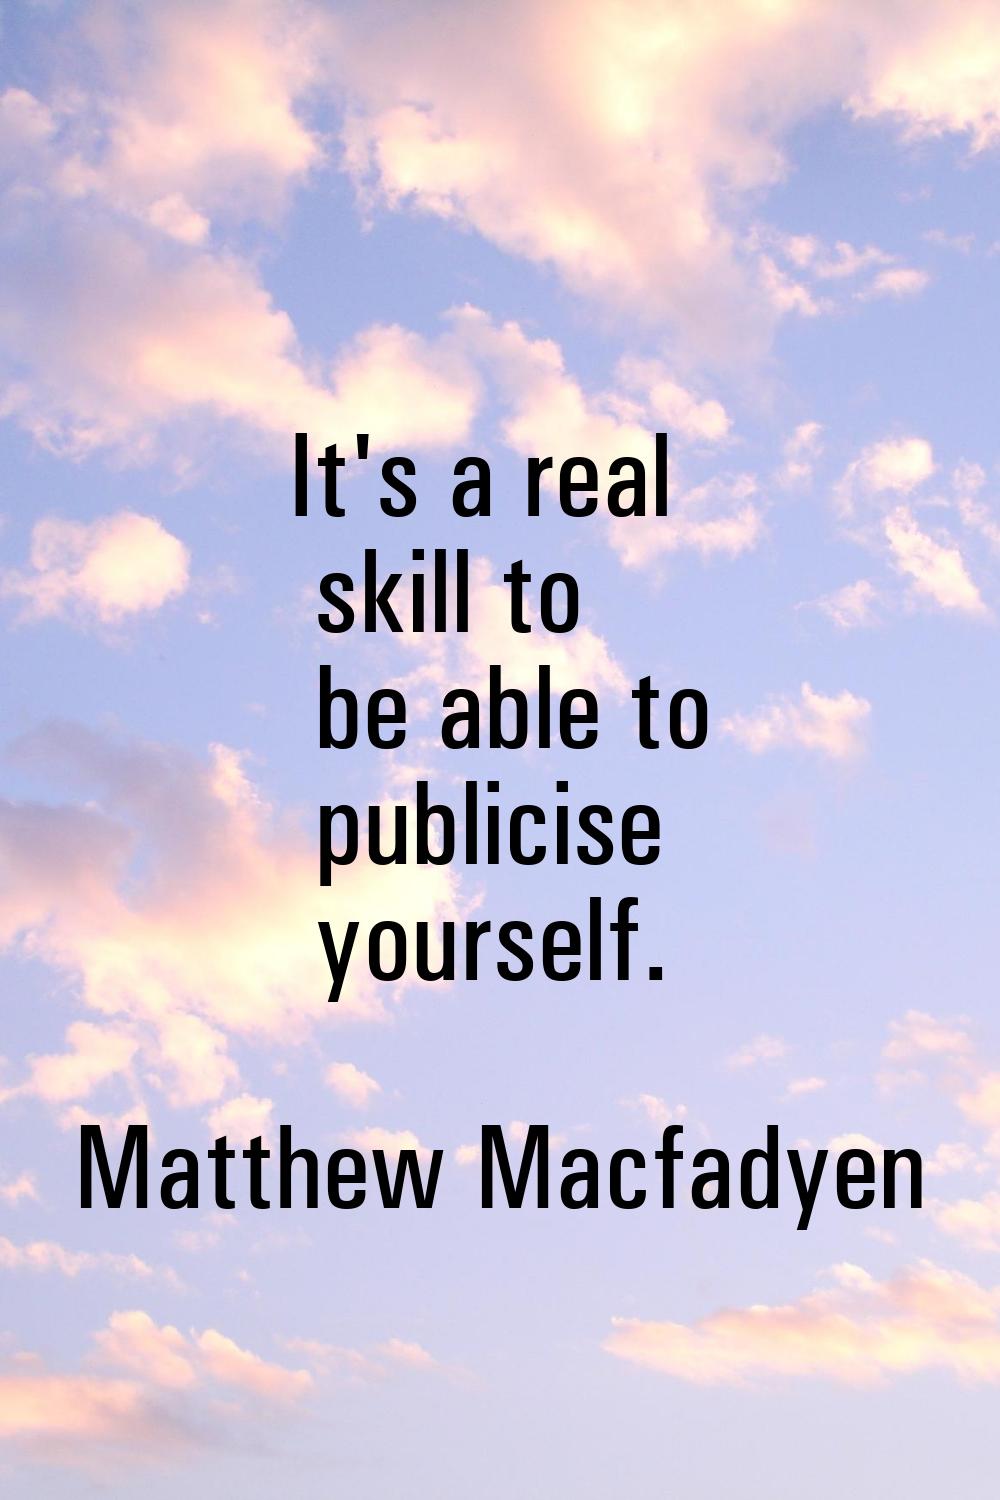 It's a real skill to be able to publicise yourself.